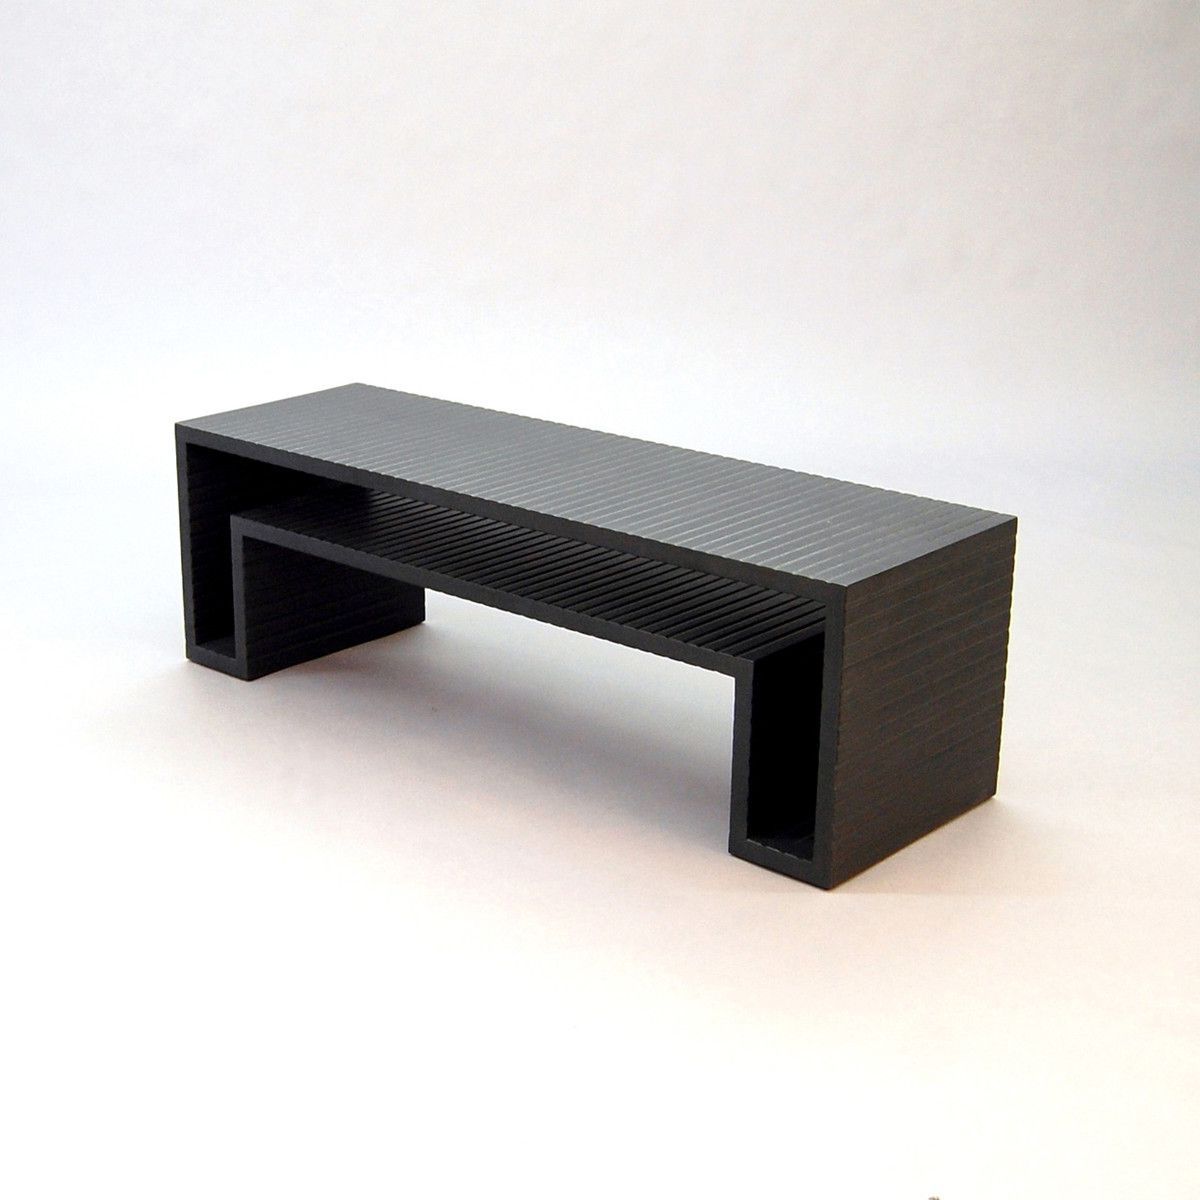 Geometric Furniture, L Shaped Pertaining To Latest L Shaped Coffee Tables (View 11 of 20)